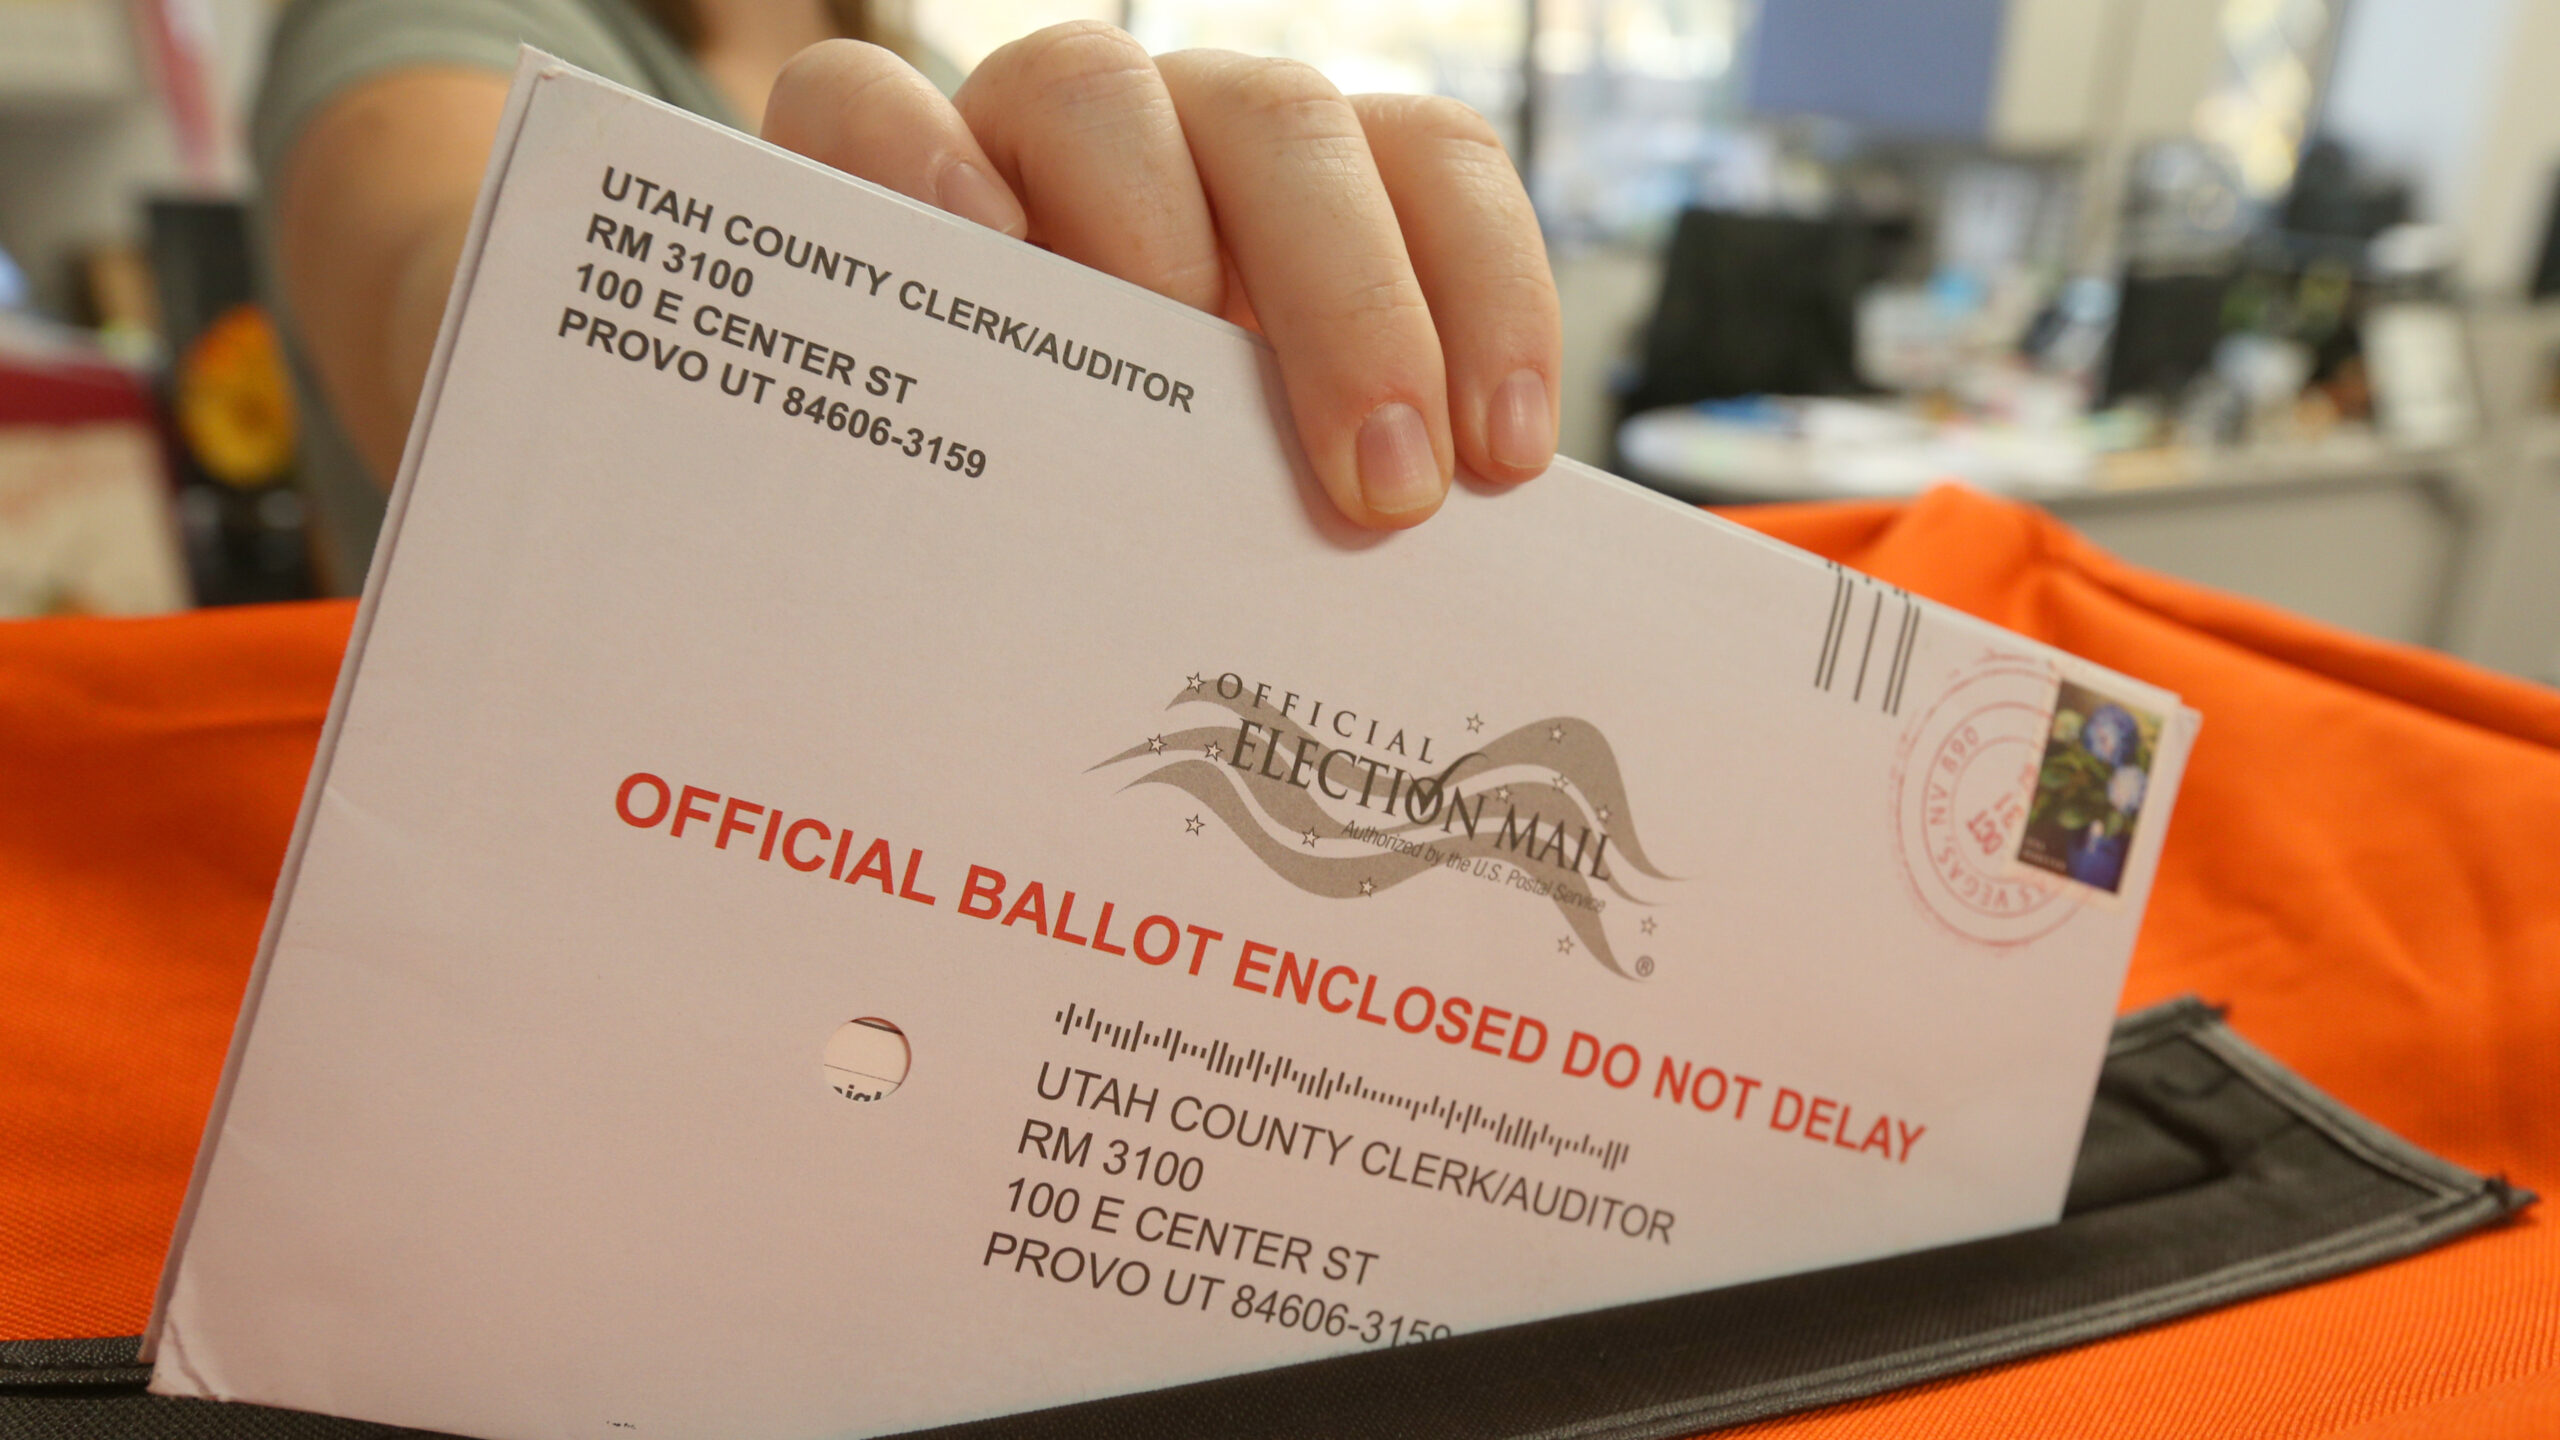 Thanks to the COVID pandemic, millions more people are expected to vote by mail in the 2020 election. To prevent massive voter fraud, the Trump Administration is taking bold action, like requiring every mail-in ballot to be accompanied by a check for $50 payable to Re-Elect Trump to Save America. Don’t forget to include postage.